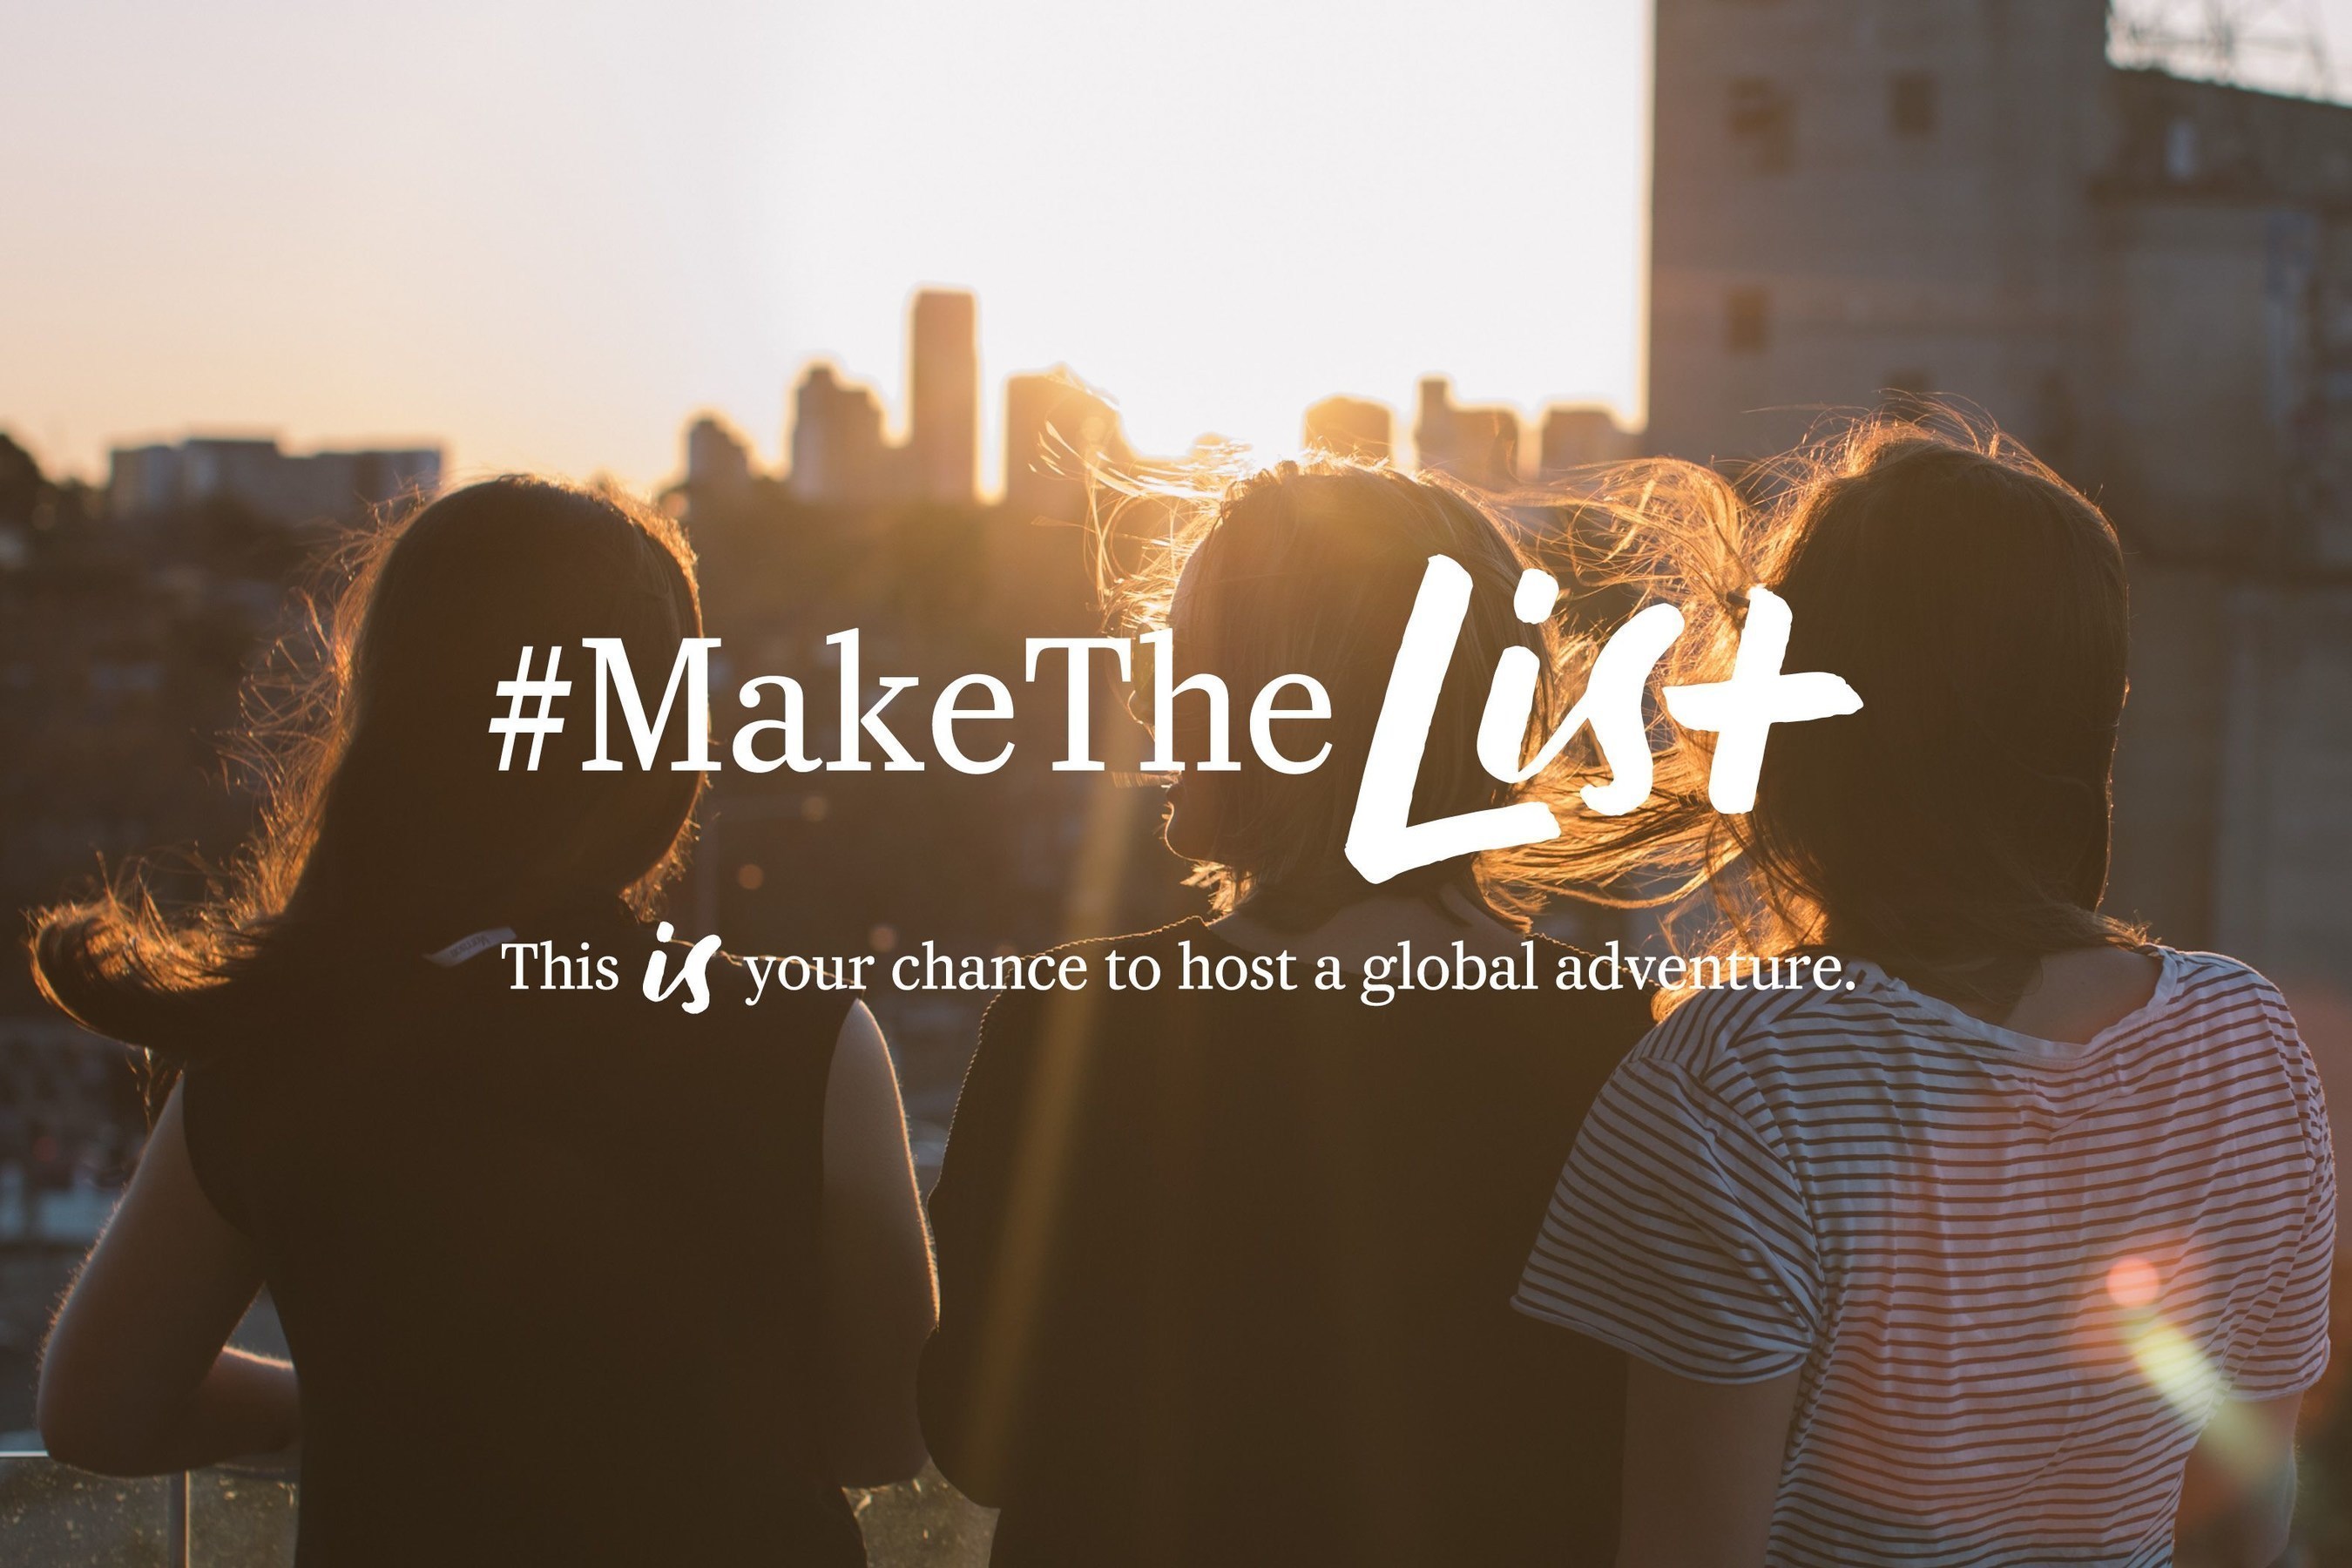 World Class is searching for the right person to take on the world's greatest opportunity: a global adventure to
create the ultimate drinks list. Travel to five of the world's most vibrant cities, immerse yourself in local culture, and uncover the most delicious food and drink. Sound like your dream gig? Head to MakeItWorldClass.com to find out how to #MakeTheList (PRNewsFoto/WORLD CLASS)